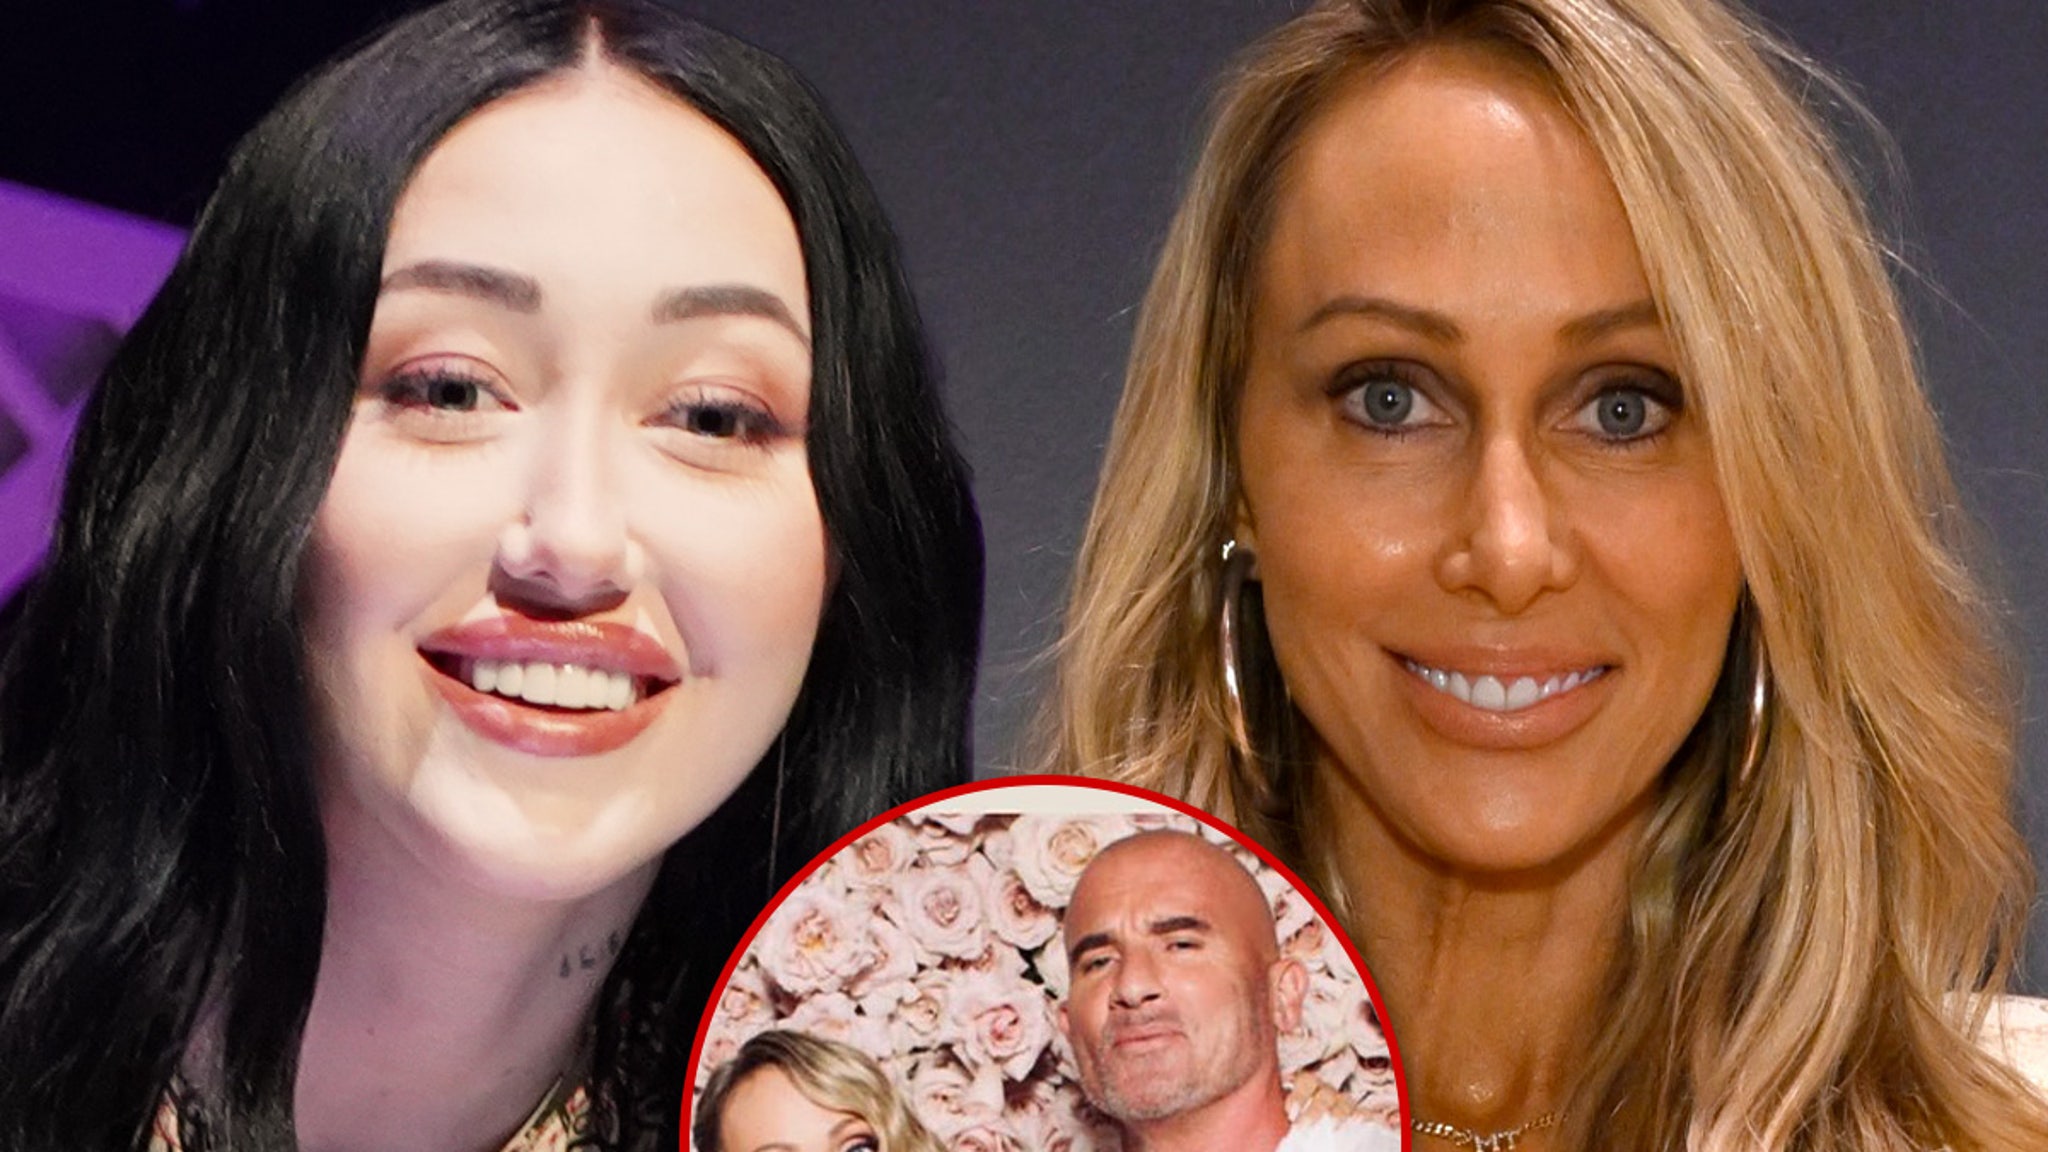 Noah Cyrus Shares IG Tribute to Mom Tish Again, Family Feud Seems Over